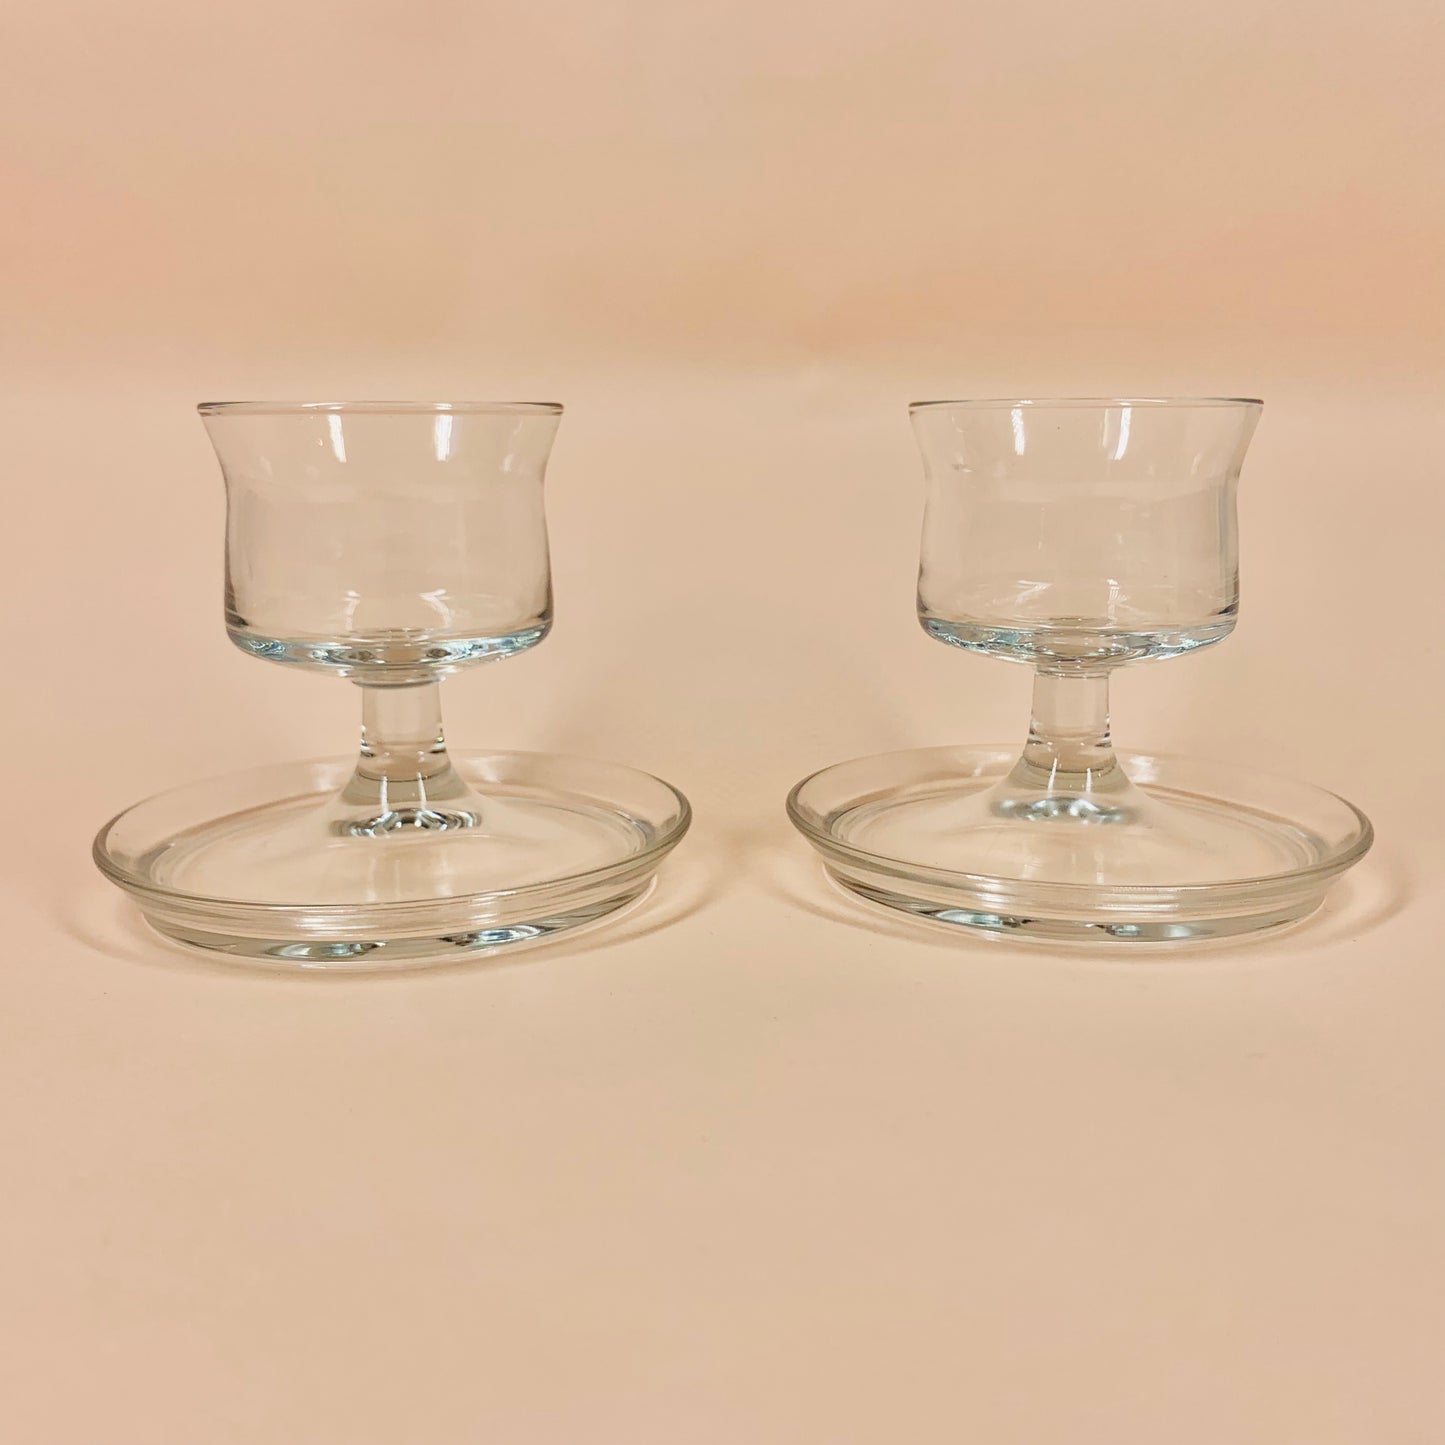 Vintage Scandinavian glass candle holders with catchment base